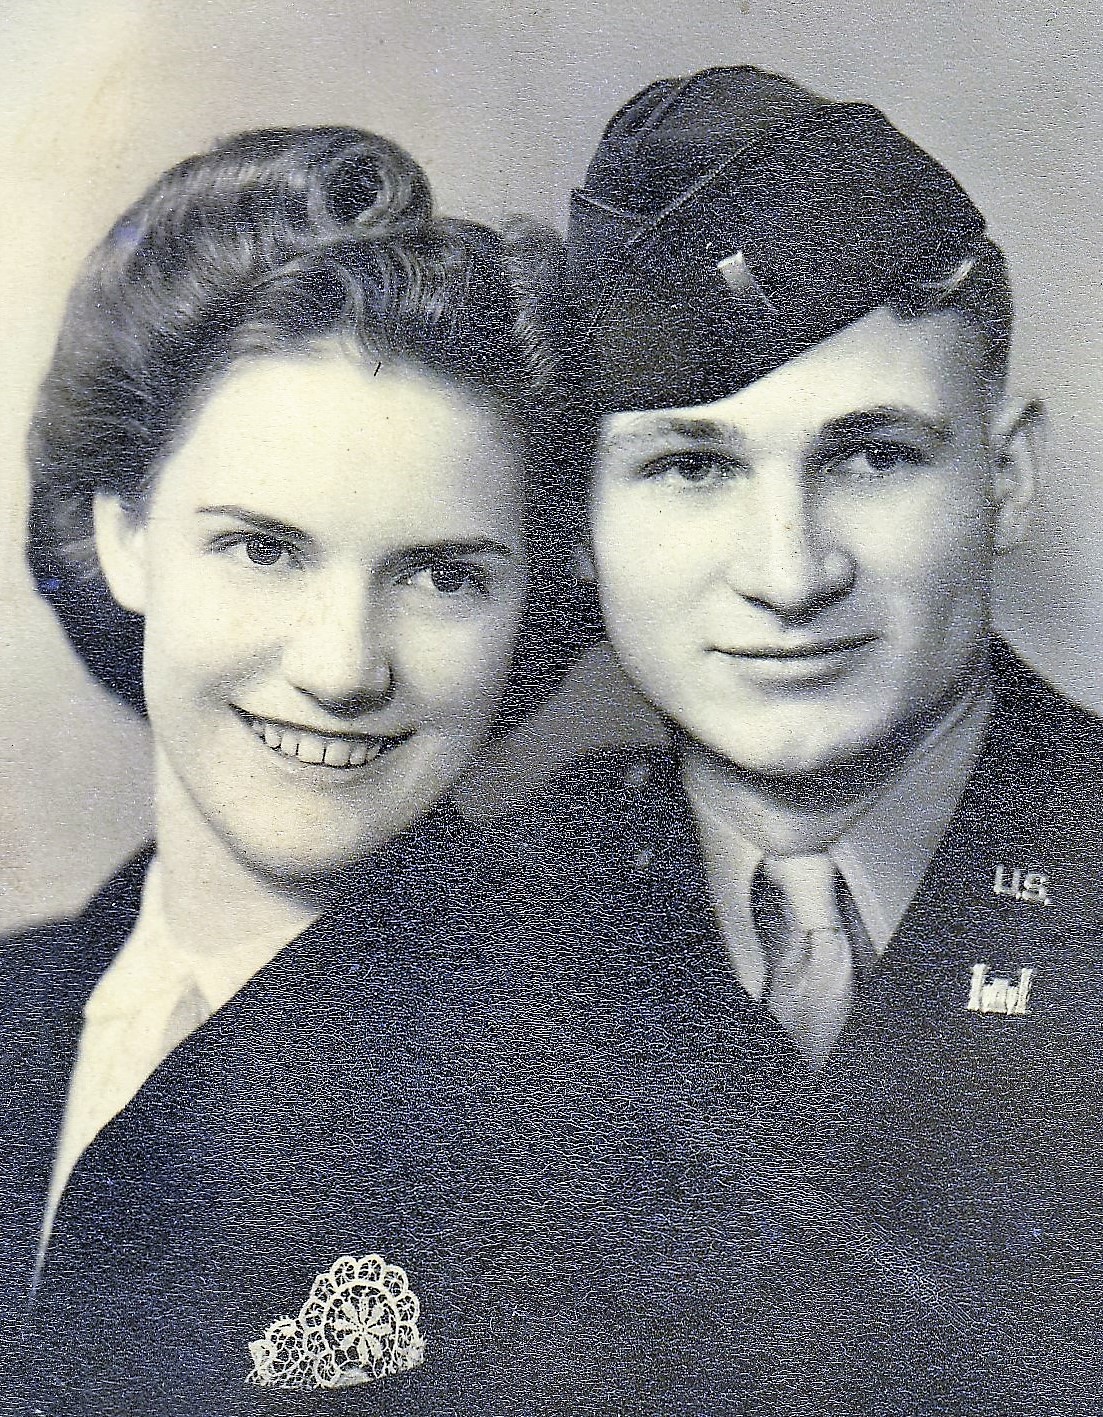 Glade & Phyllis Wittwer in October of 1942, shortly after being married